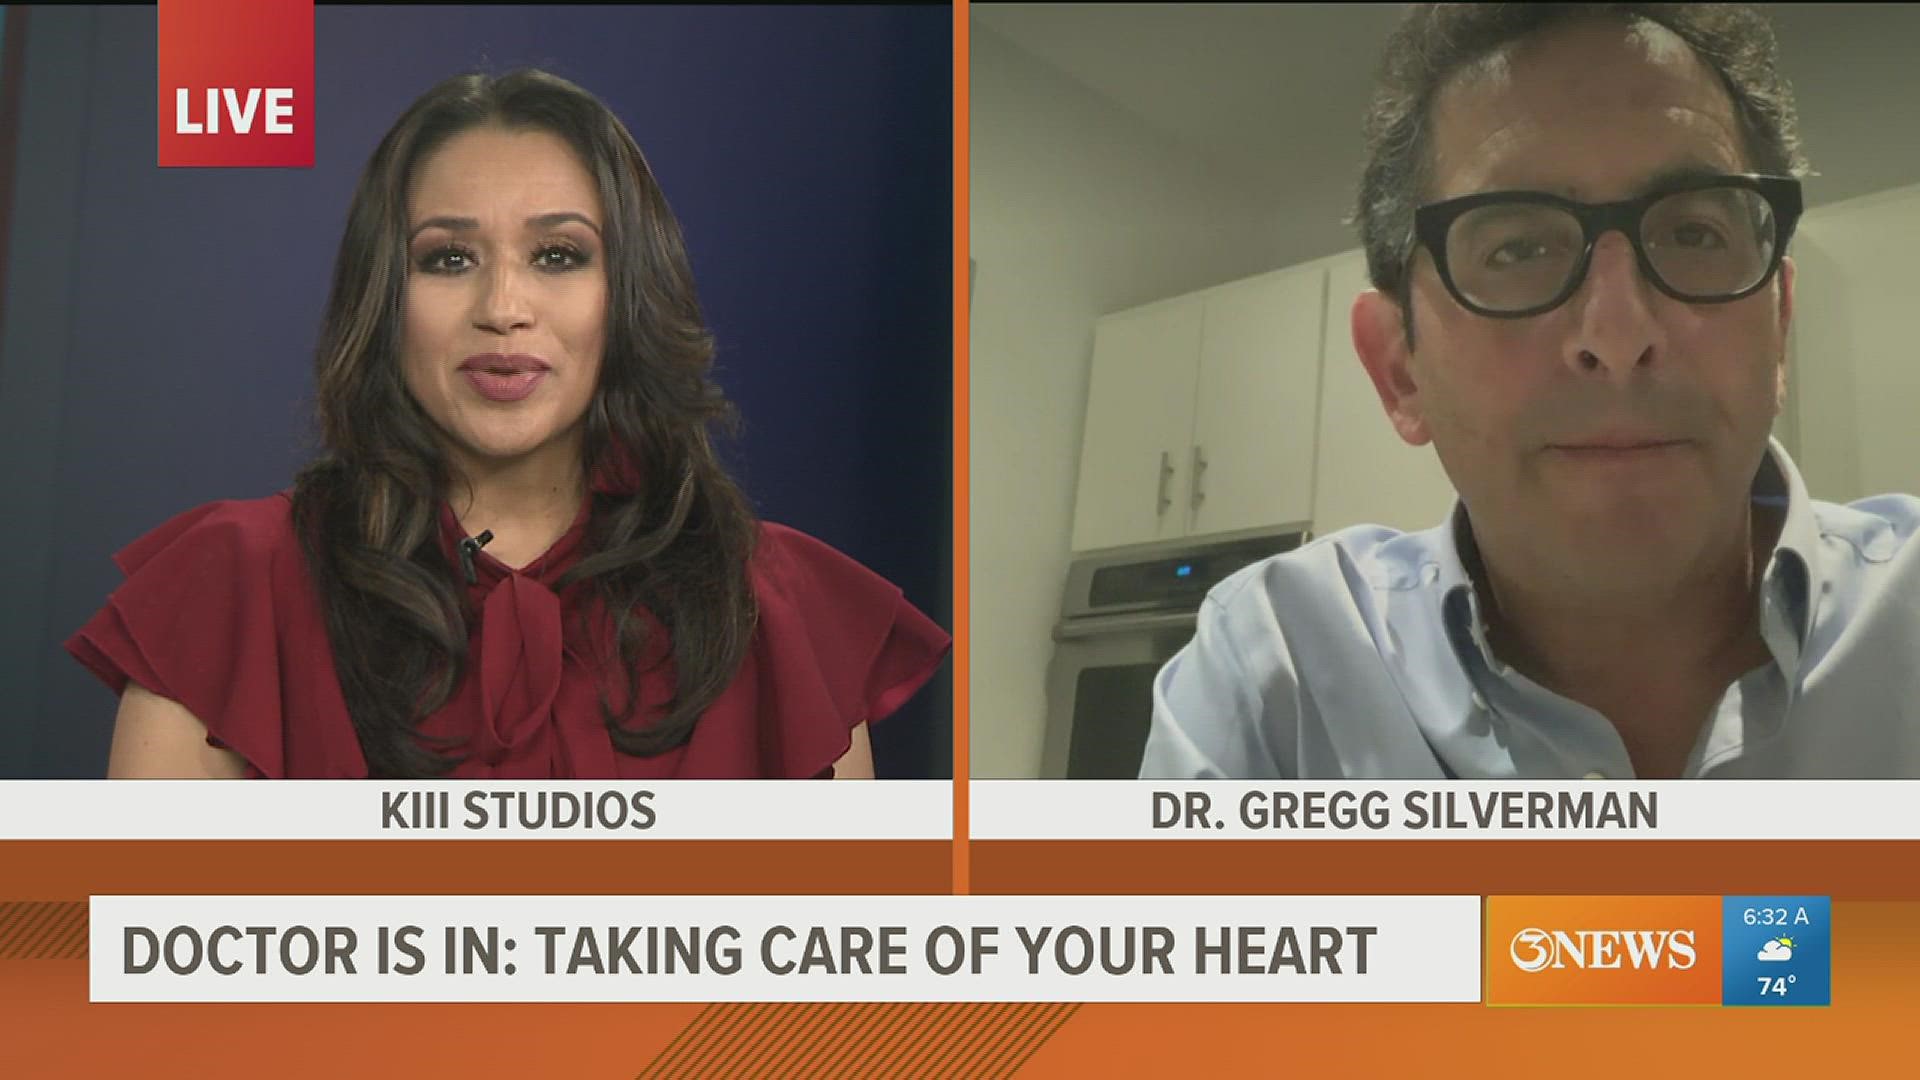 Dr. Silverman discusses on how to take care of your heart.